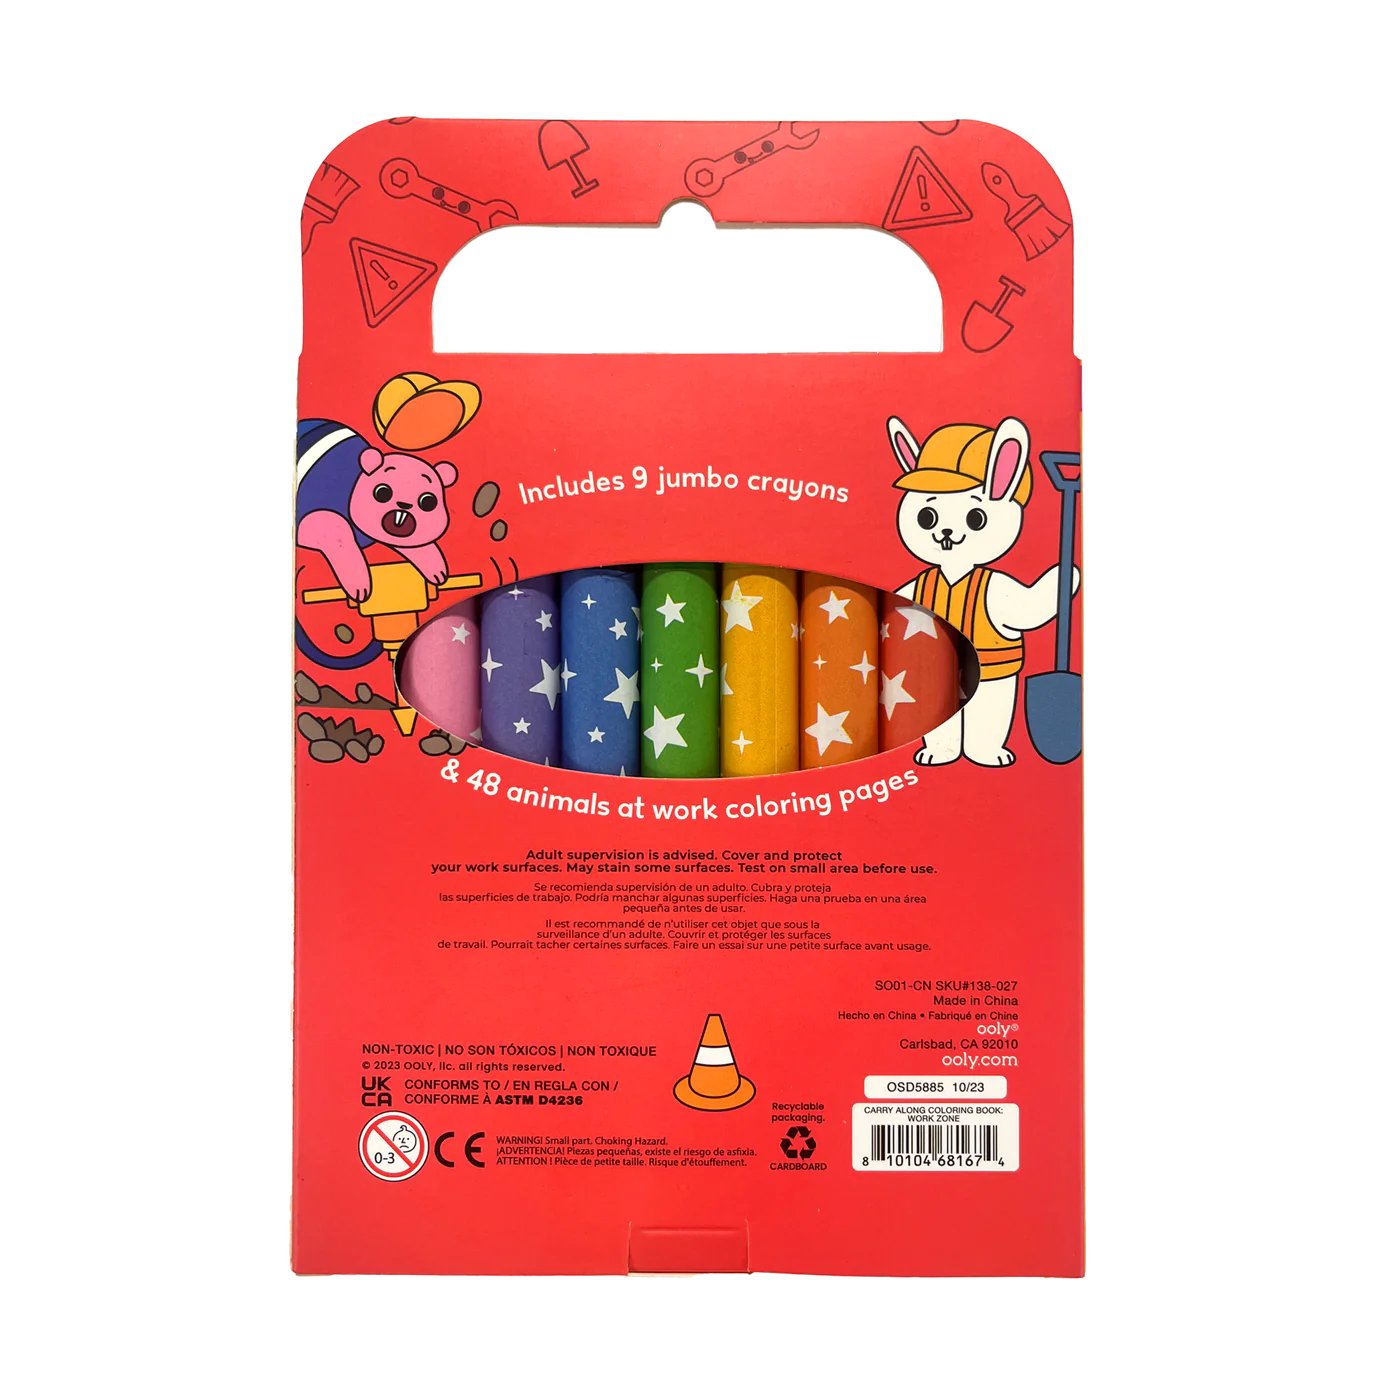 Ooly Carry Along! Coloring Book and Crayon Set - Work Zone - Set of 9 Crayons-OOLY-Little Giant Kidz